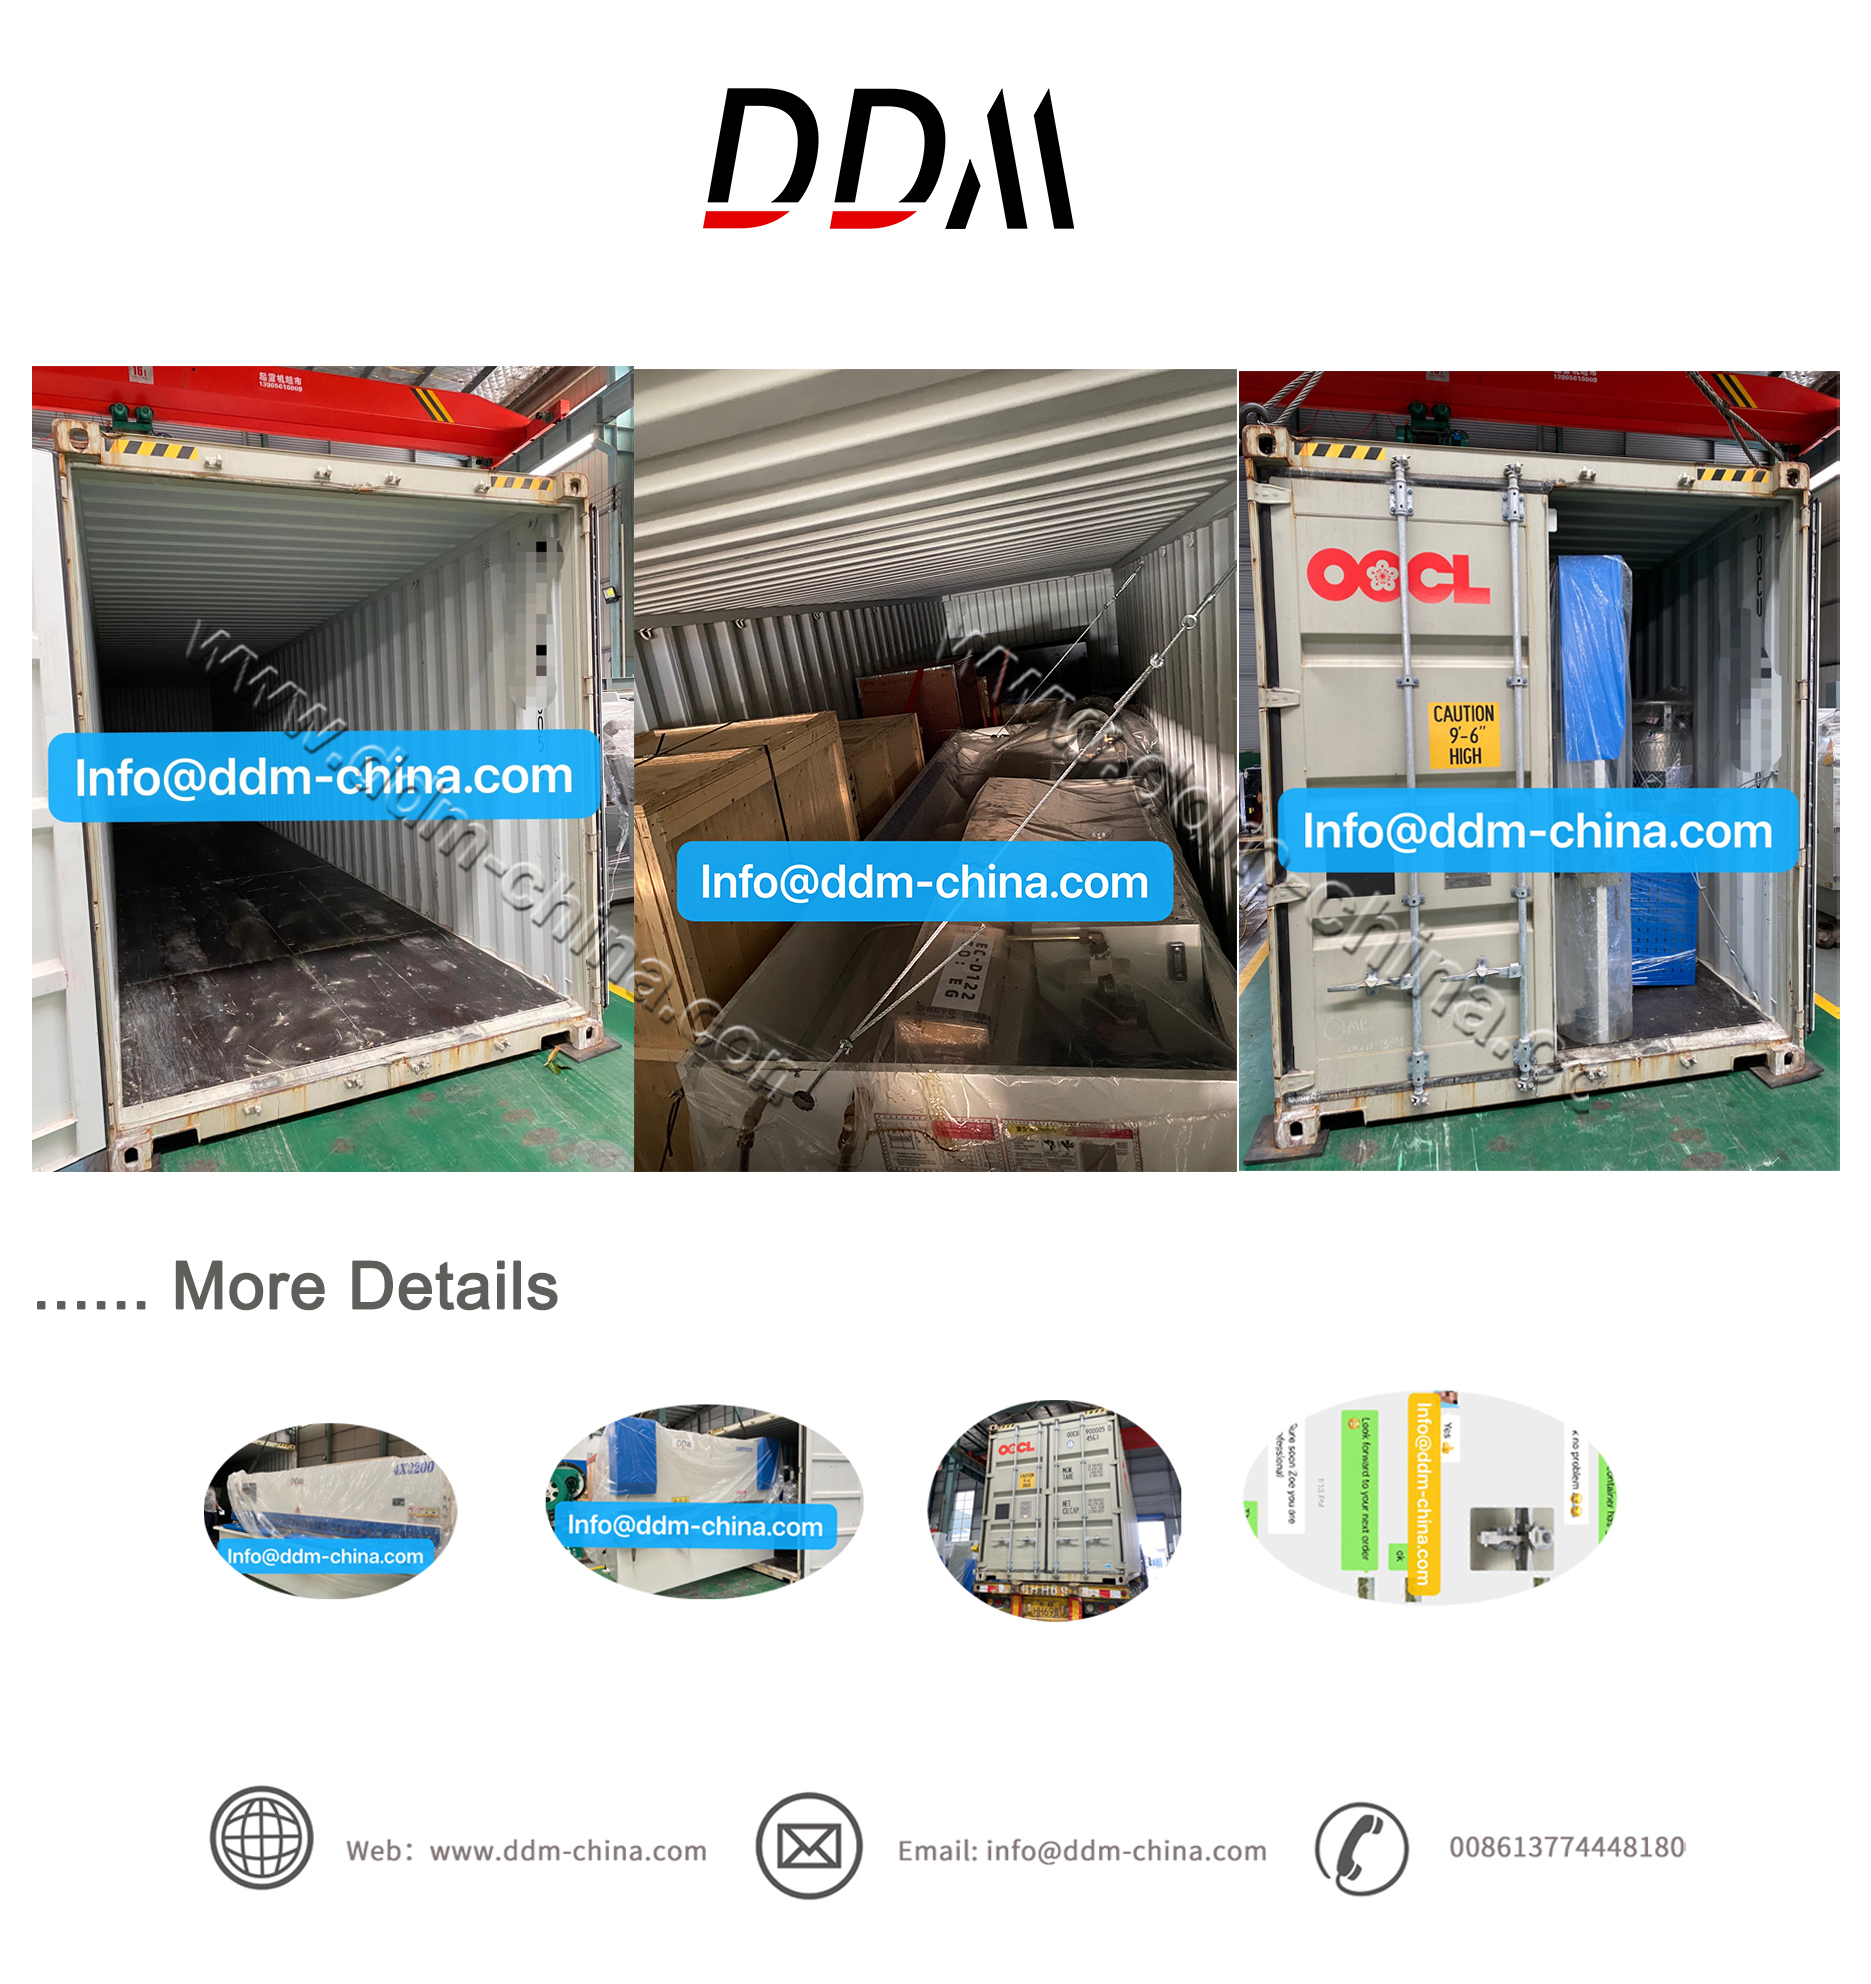 DDM-Container loading image to Egypt 